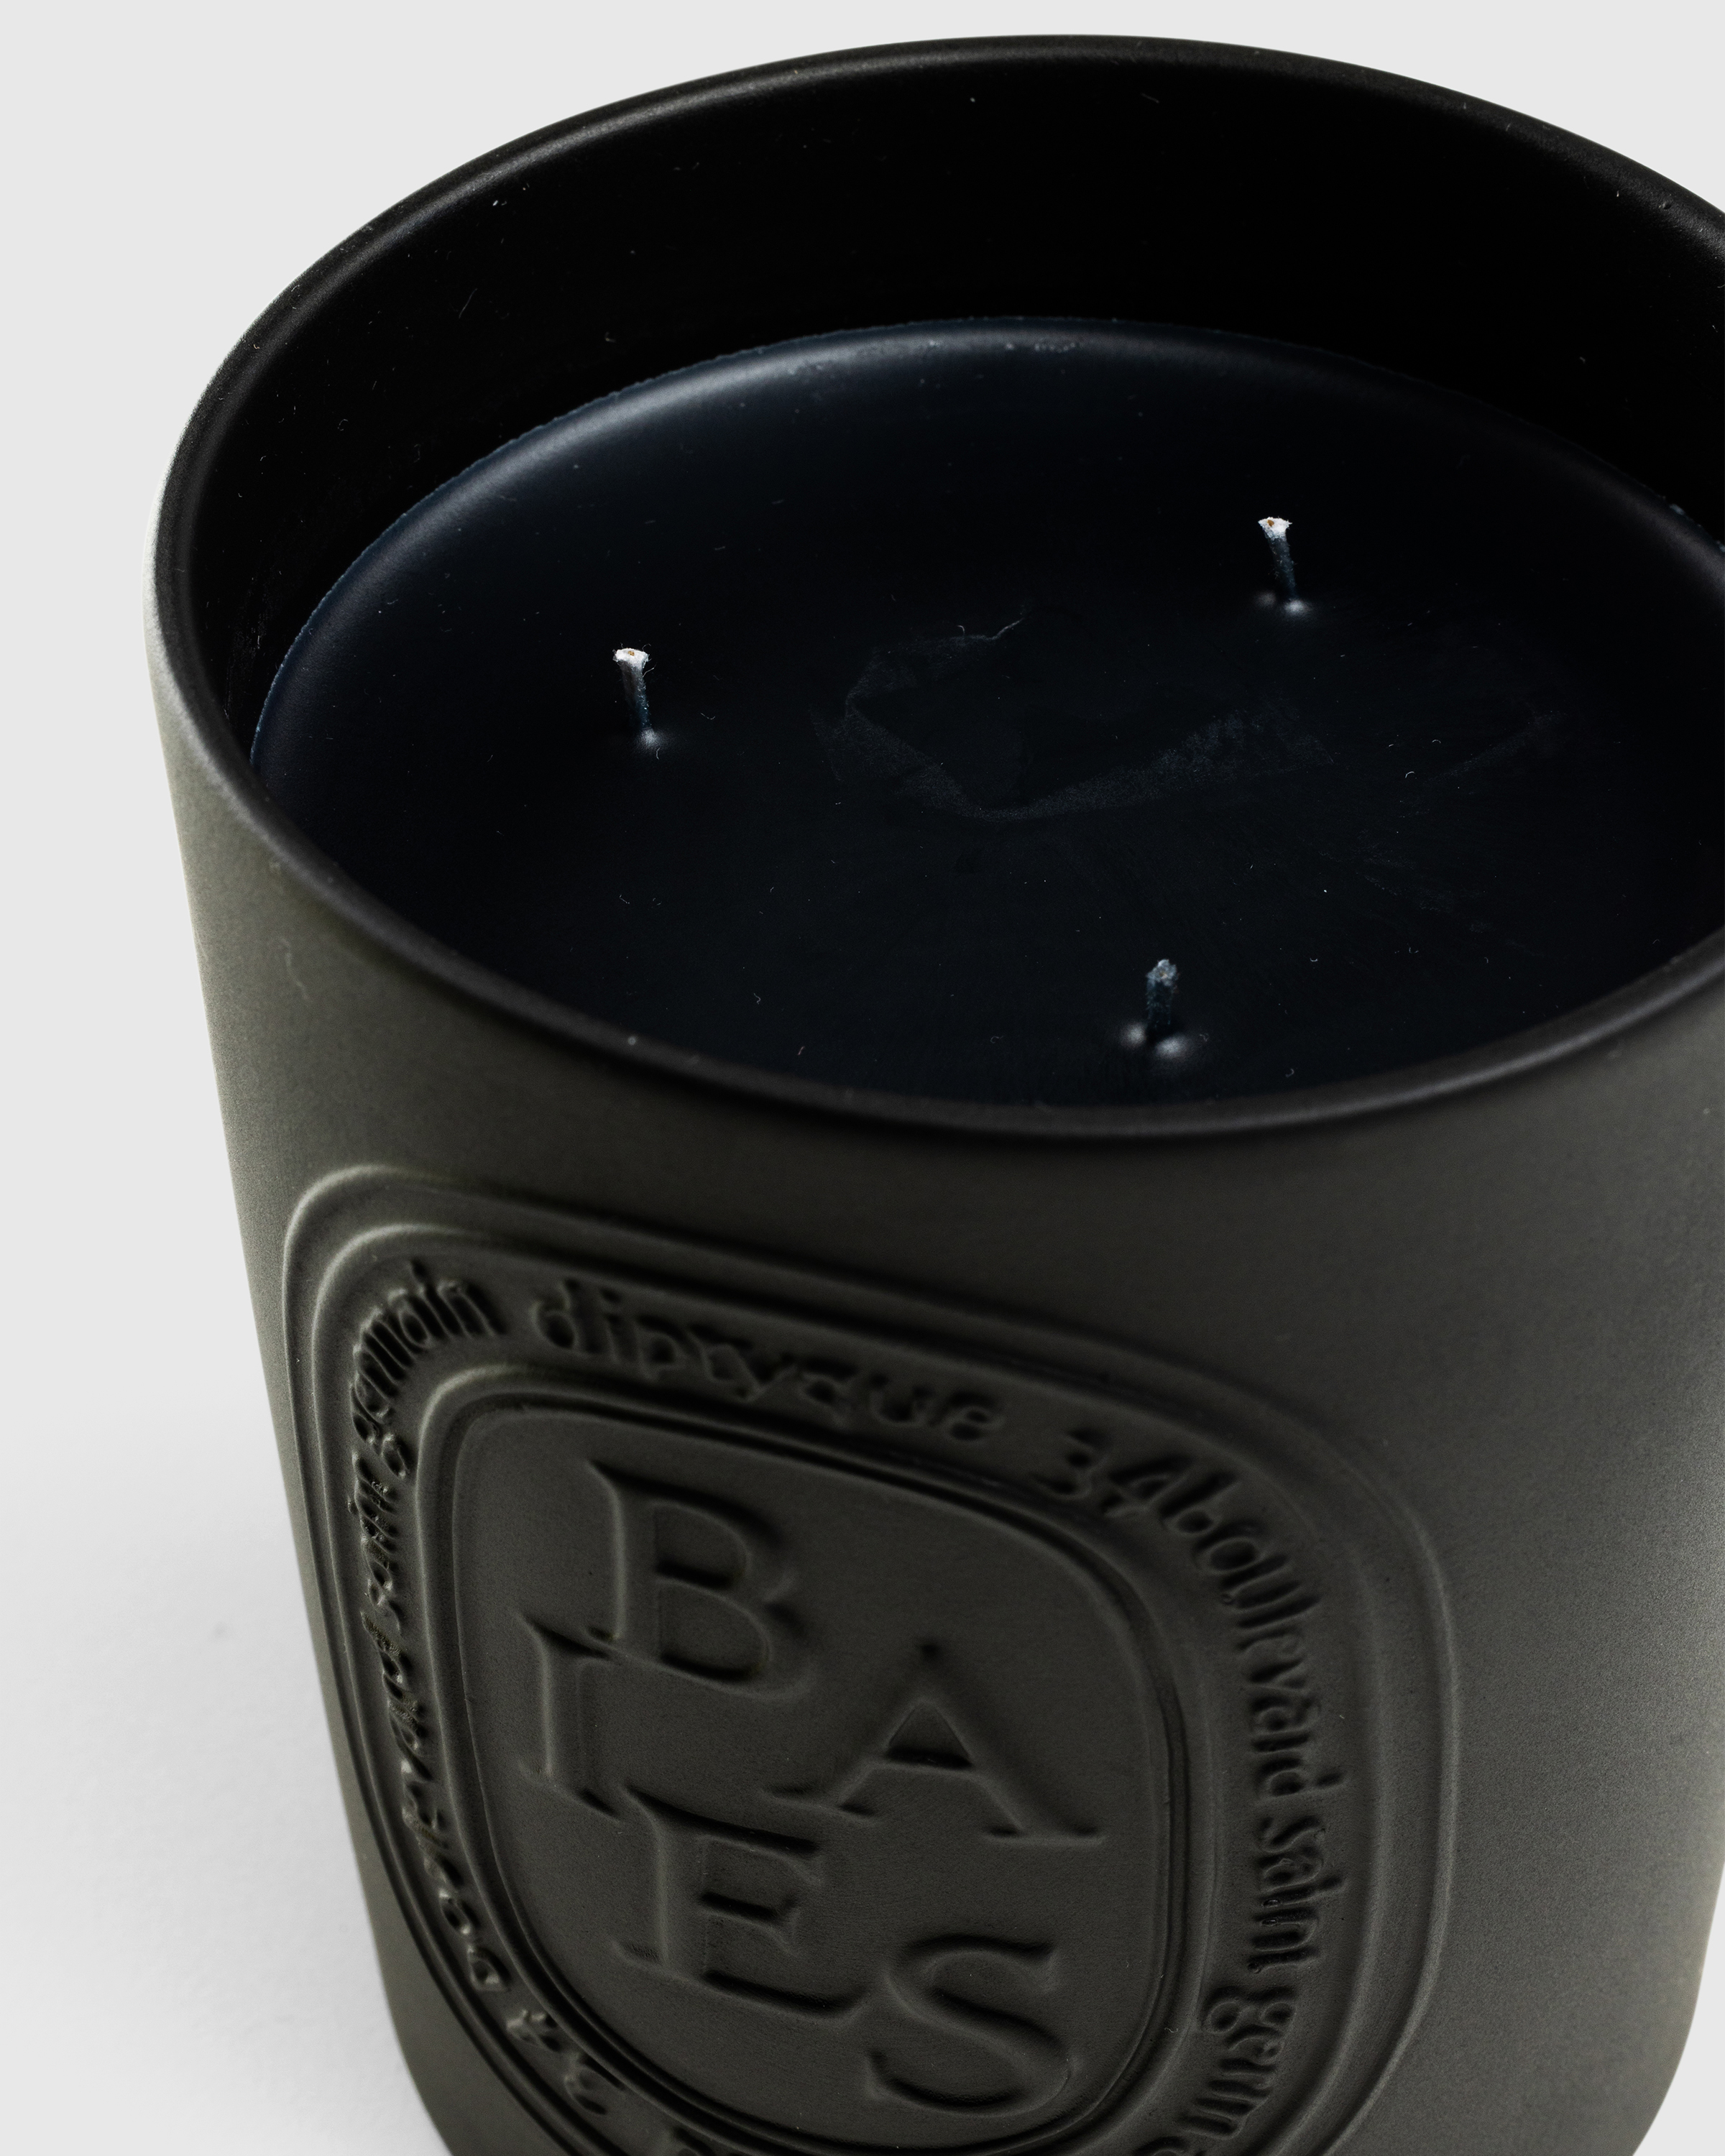 Diptyque – Candle Baies 600g - Candles & Fragrances - Black - Image 2